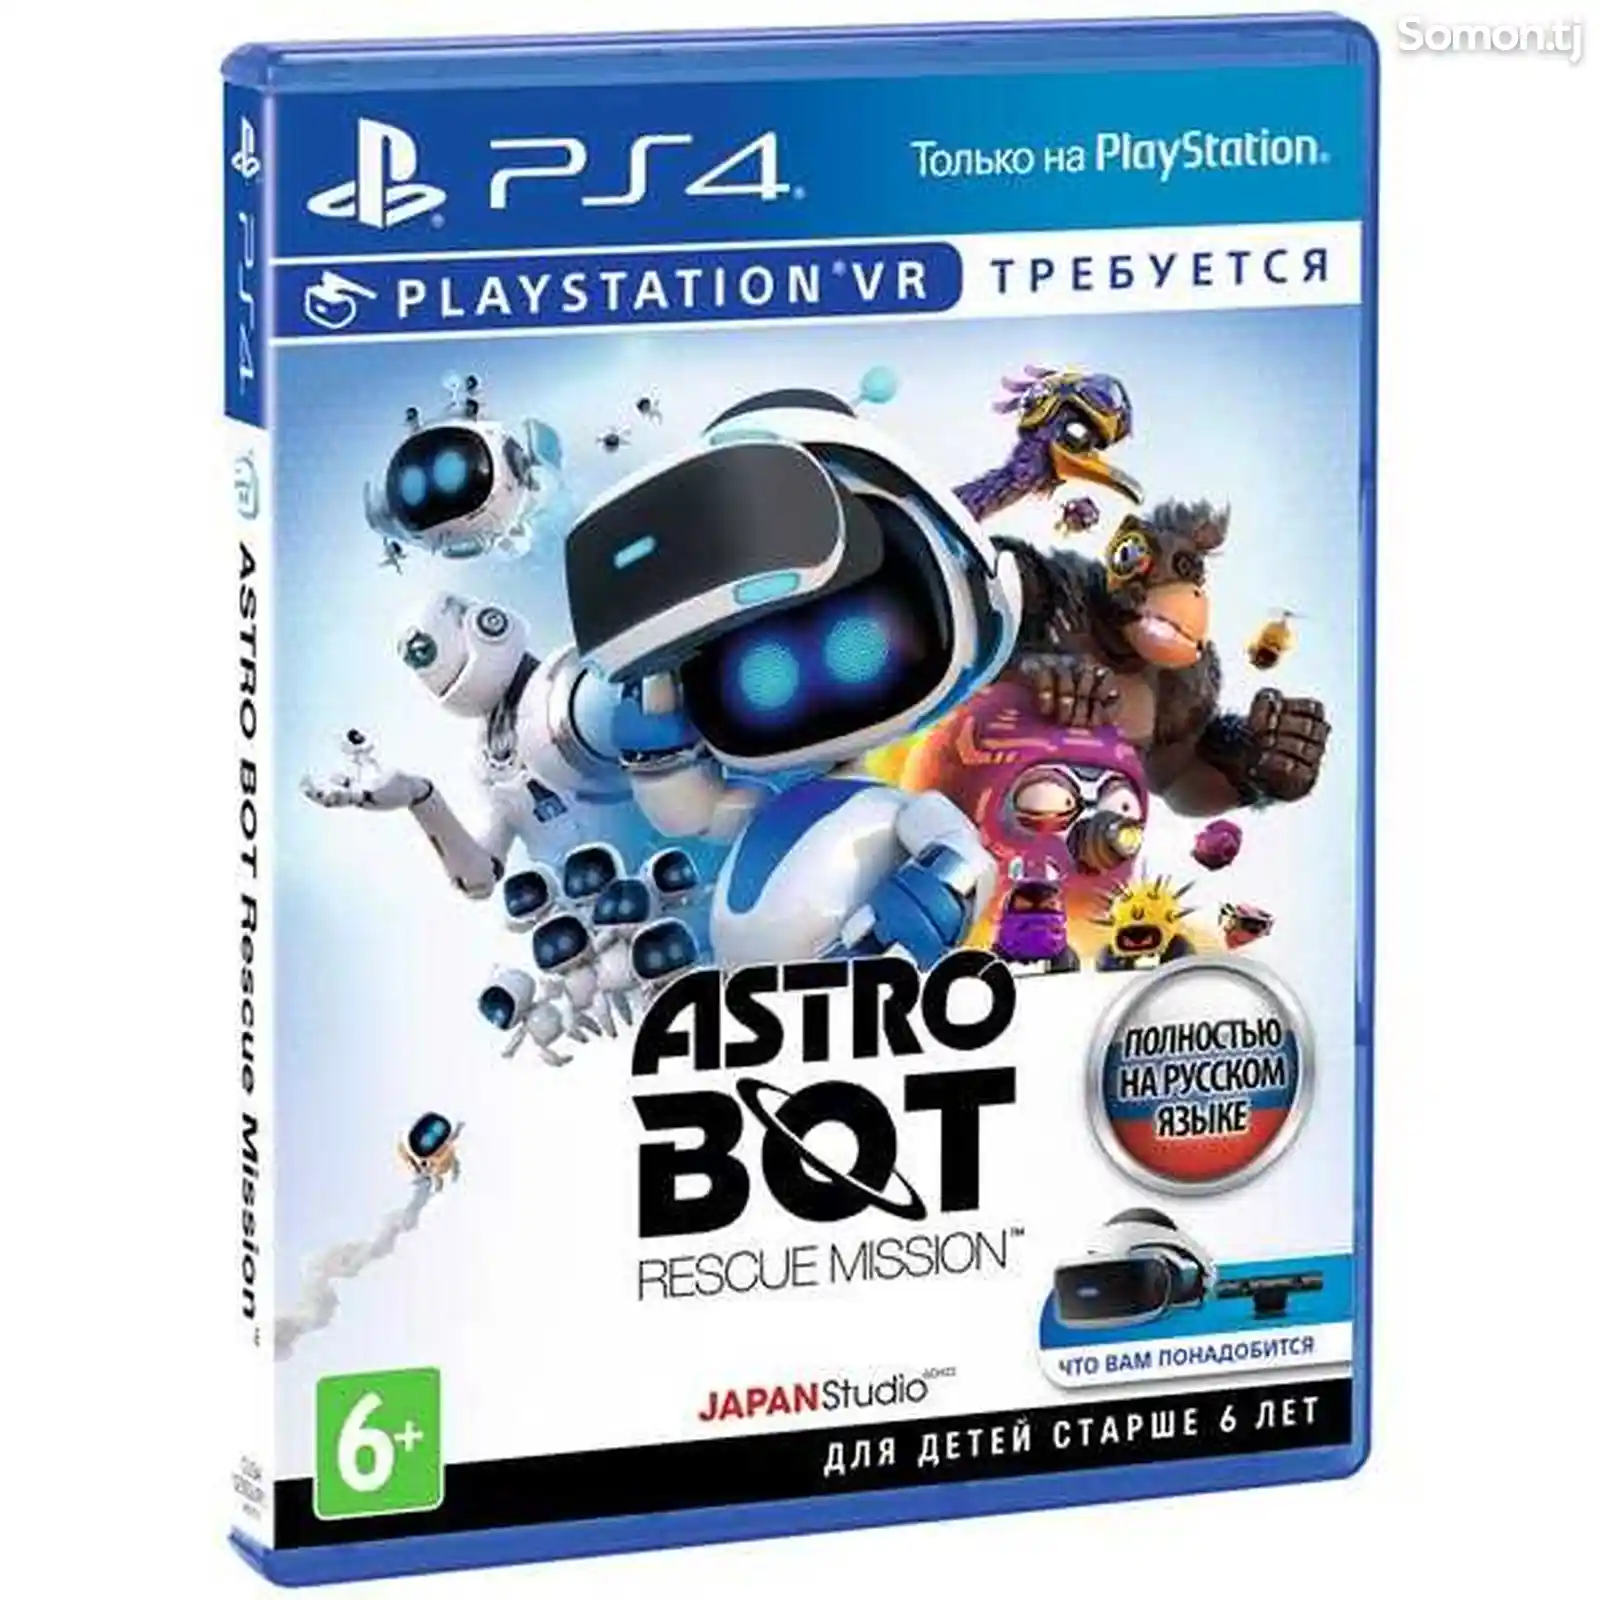 PS4 игра Sony Astro Bot Rescue Mission только для PS VR-1